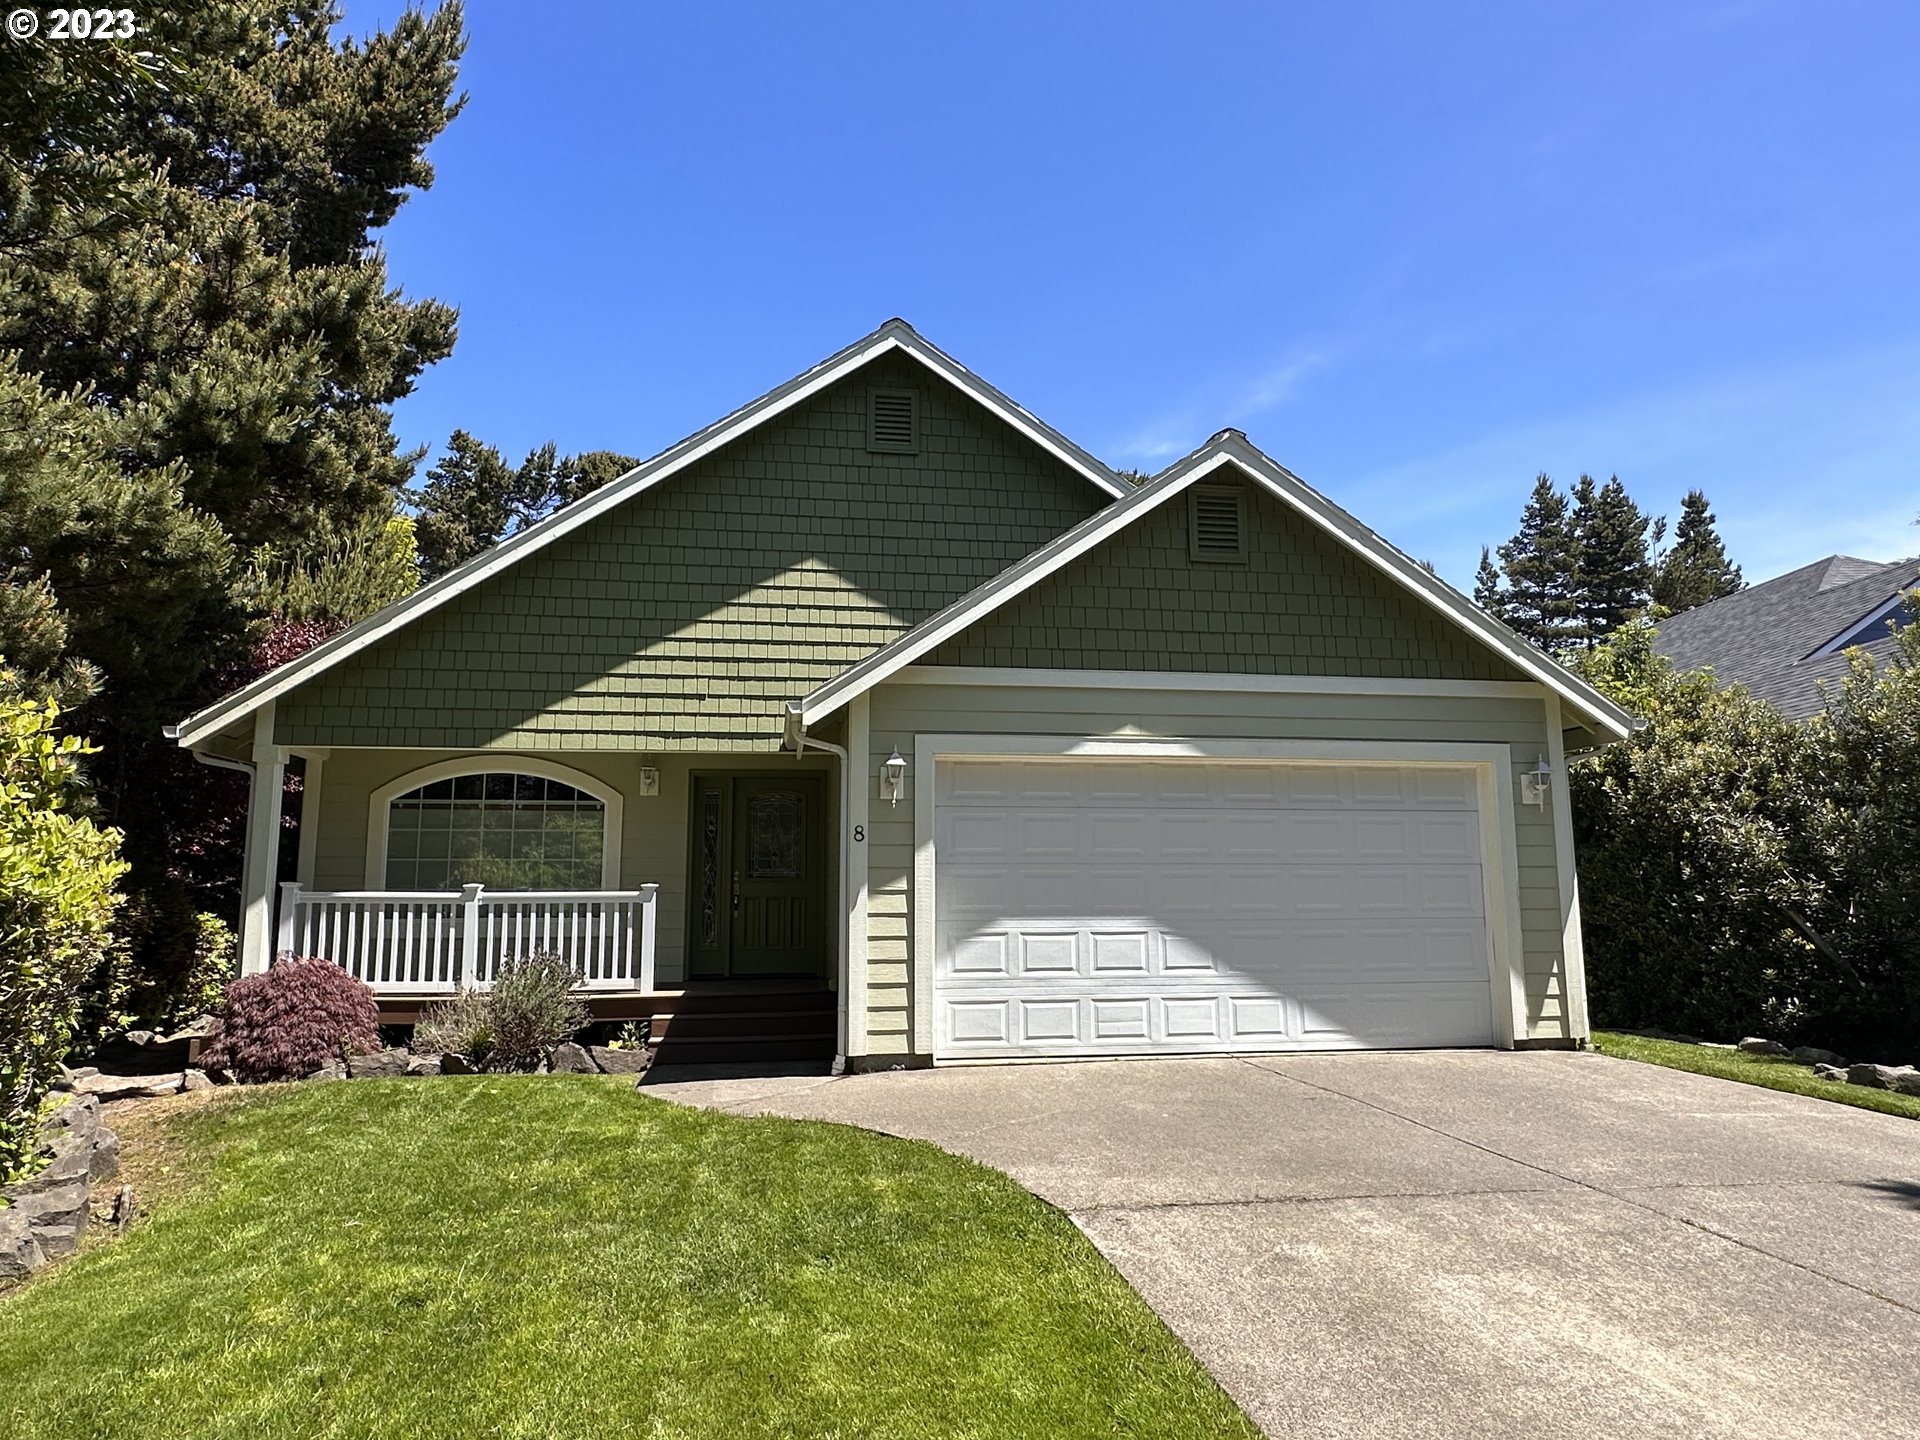 8 Mariners LN, Florence, OR 97439